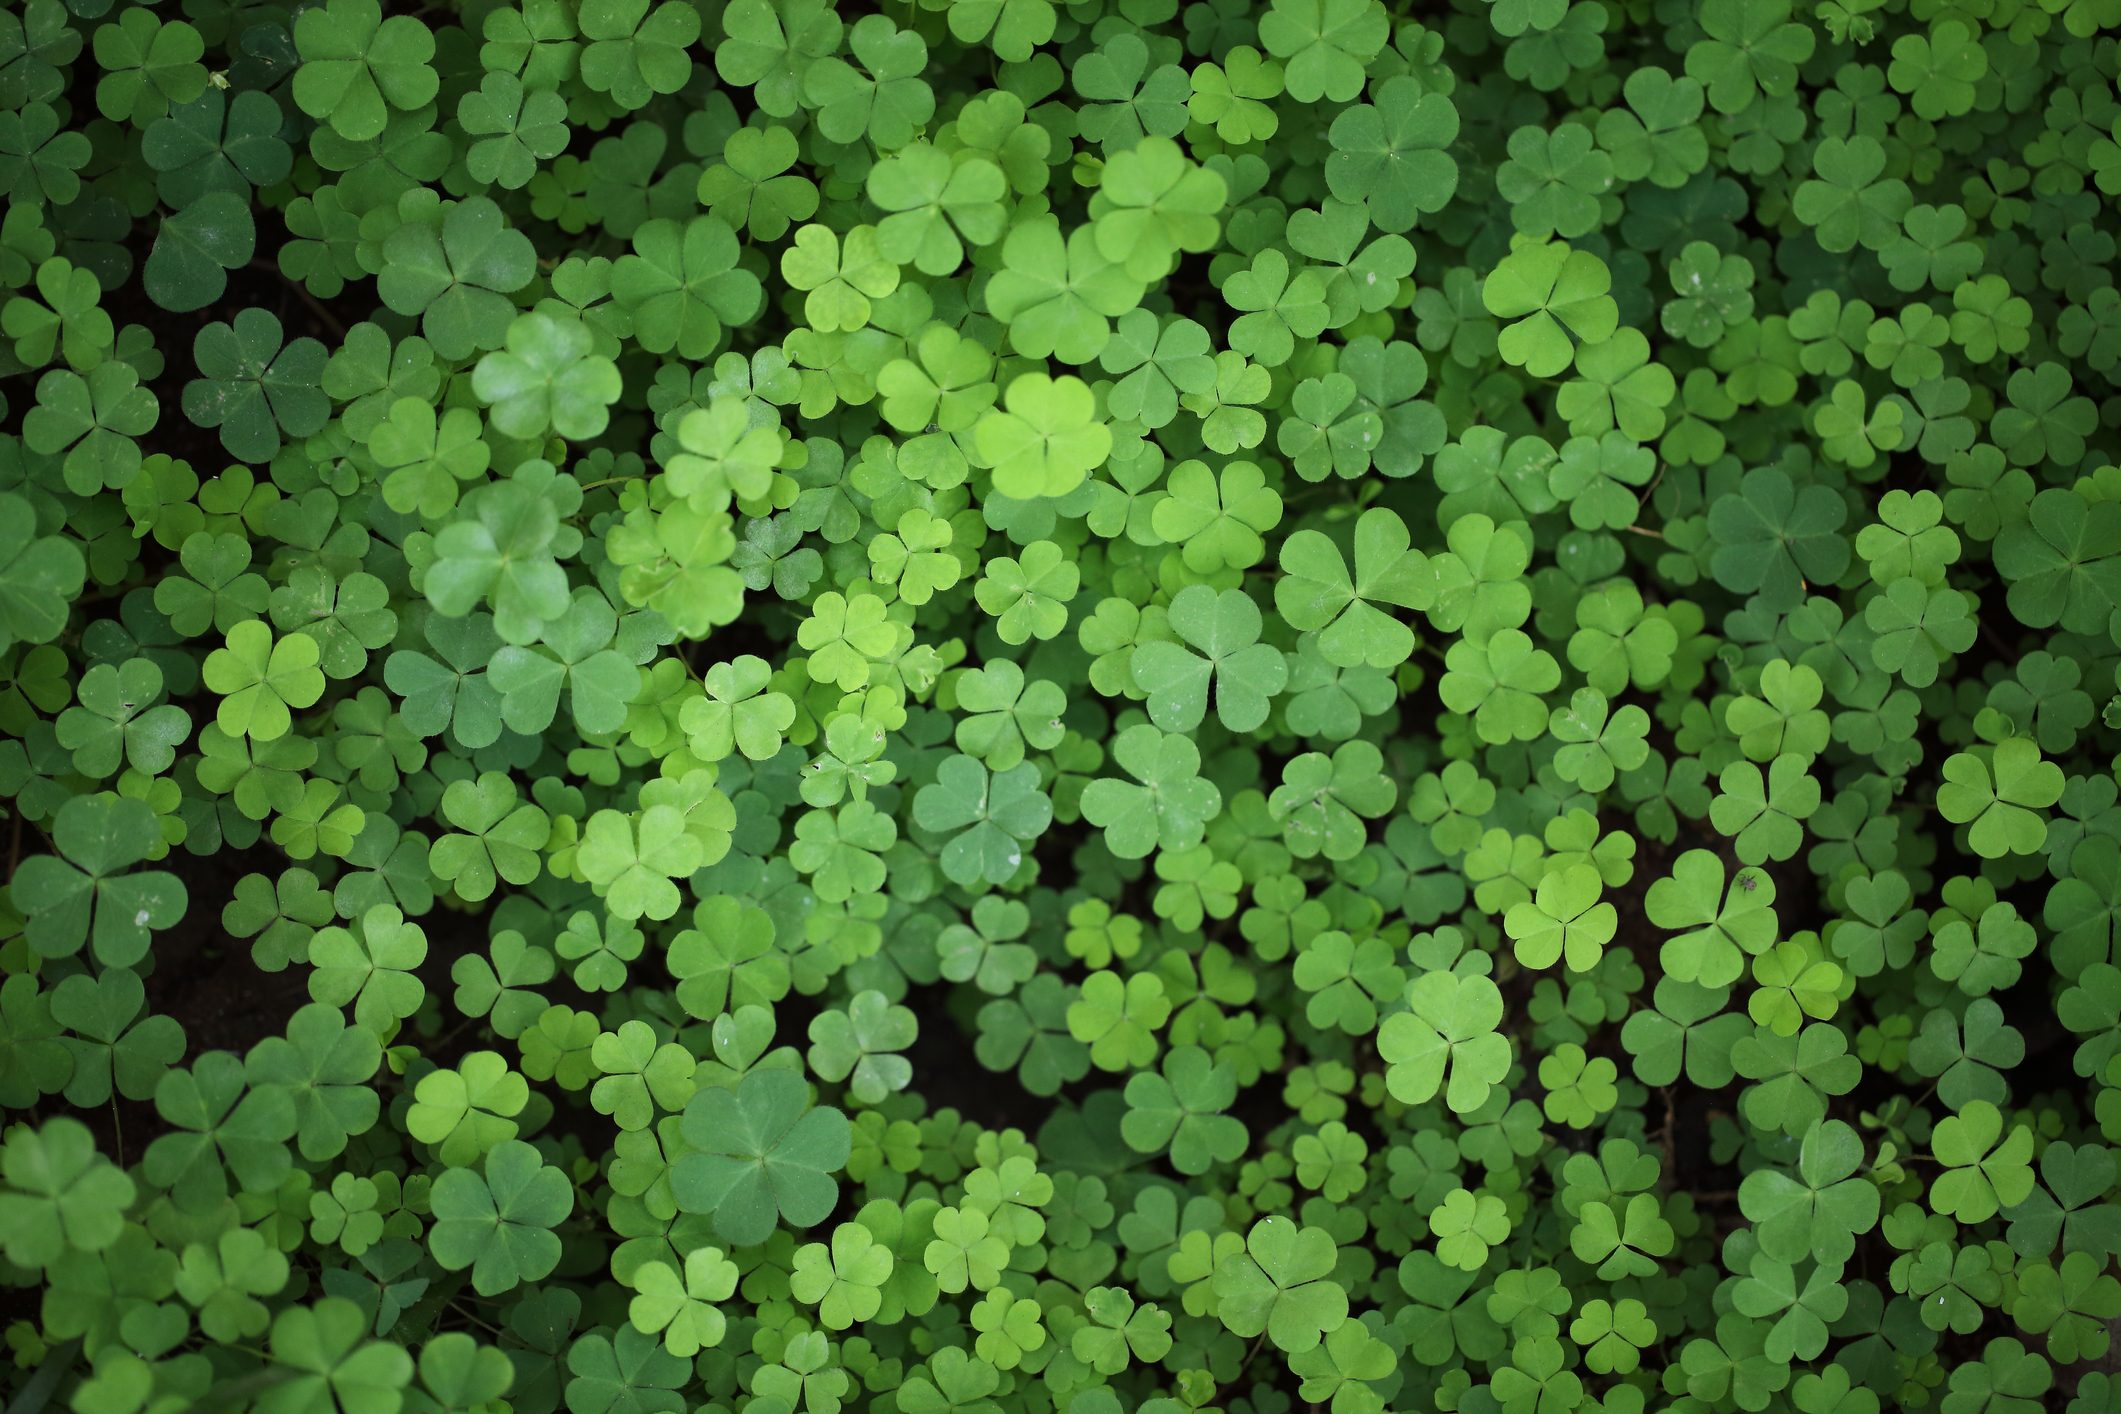 5 Leaf Clover Meaning: Luck, Rarity, & More